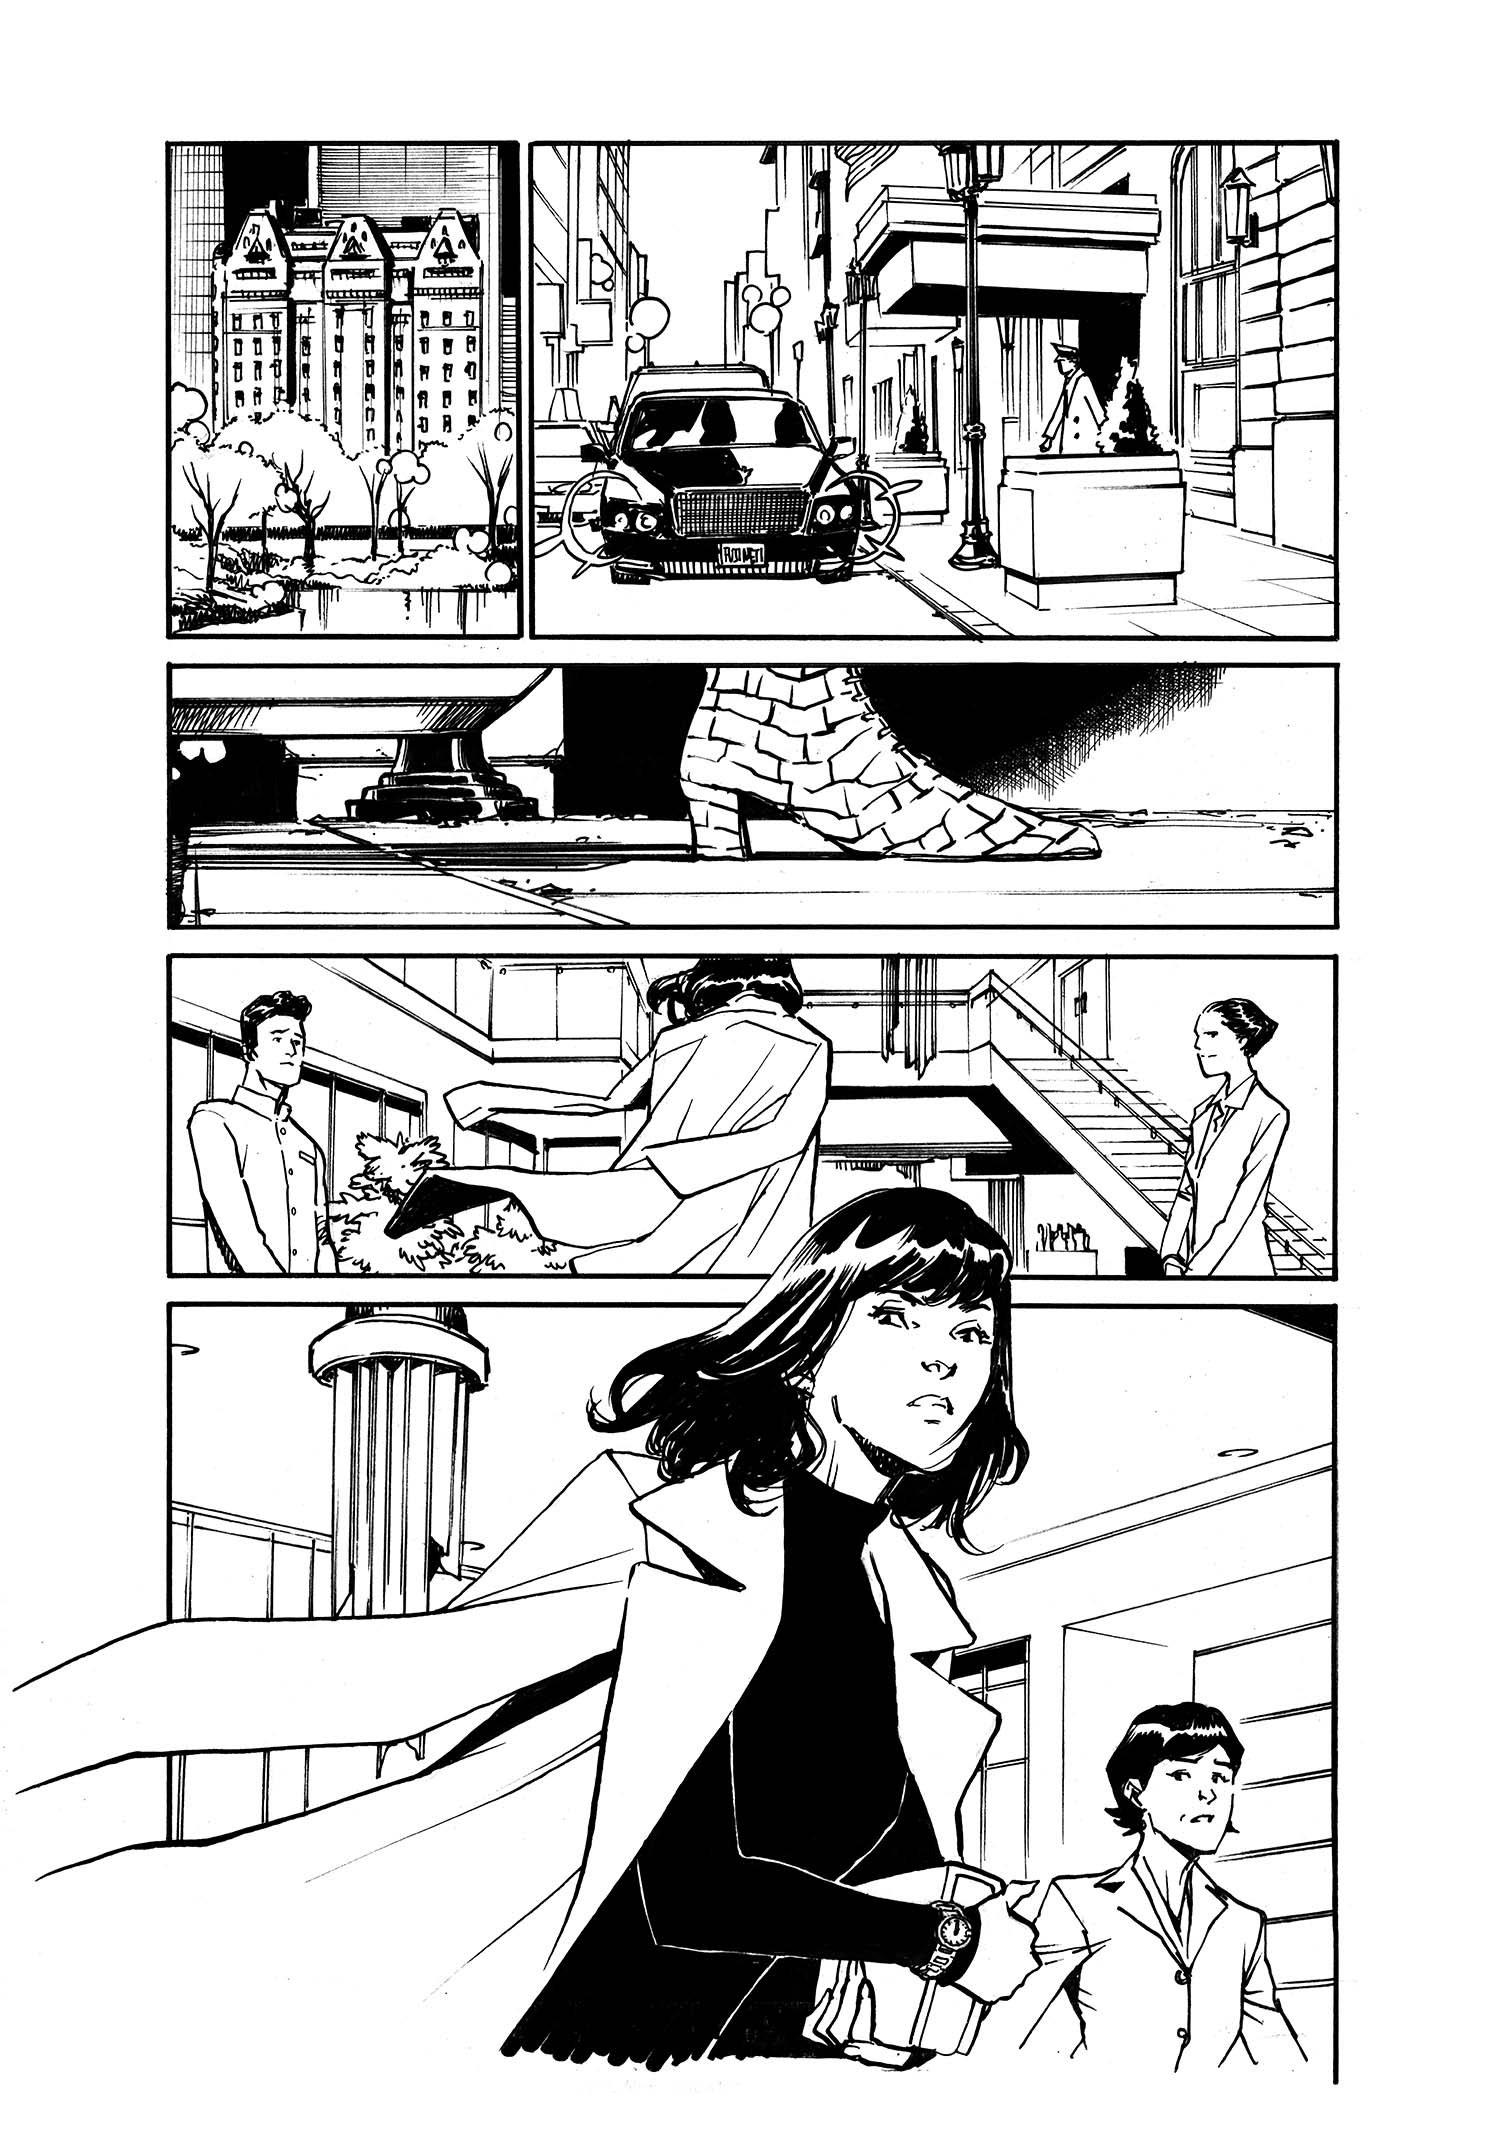 Image of Silk 1 Page 19 